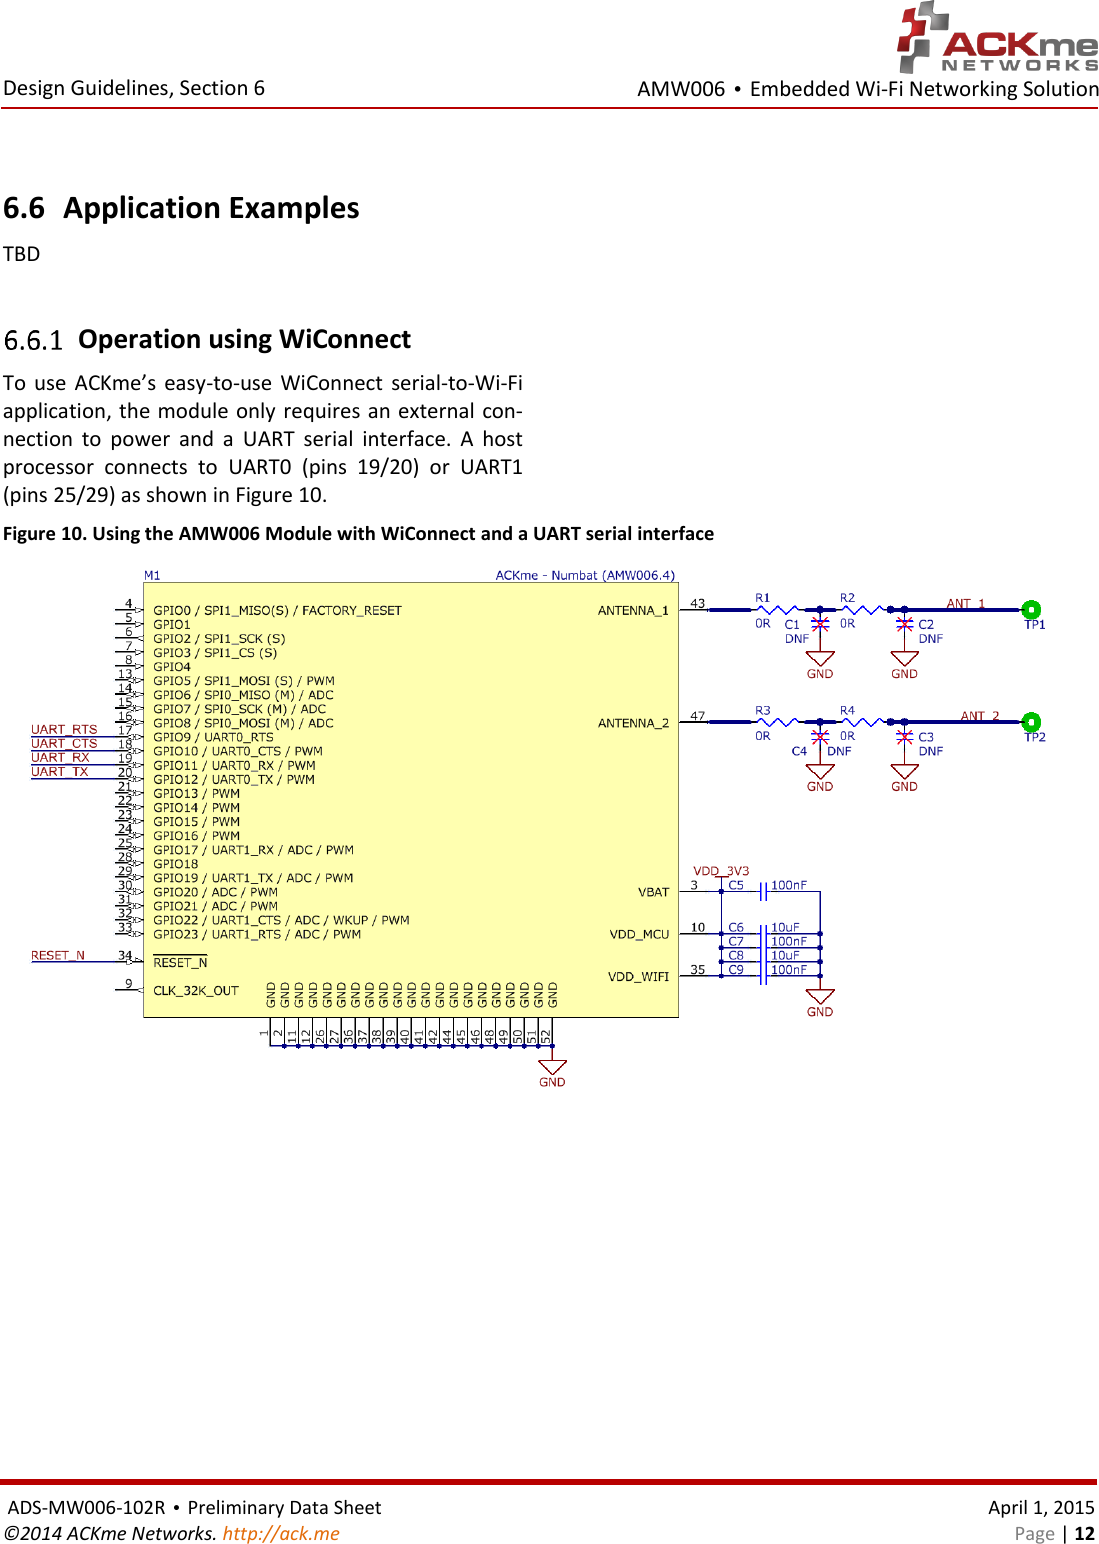 AMW006 • Embedded Wi-Fi Networking Solution  Design Guidelines, Section 6  ADS-MW006-102R • Preliminary Data Sheet    April 1, 2015 ©2014 ACKme Networks. http://ack.me    Page | 12  6.6 Application Examples TBD   Operation using WiConnect To  use  ACKme’s  easy-to-use WiConnect  serial-to-Wi-Fi application, the module only  requires an external con-nection  to  power  and  a  UART  serial  interface.  A  host processor  connects  to  UART0  (pins  19/20)  or  UART1 (pins 25/29) as shown in Figure 10.  Figure 10. Using the AMW006 Module with WiConnect and a UART serial interface   